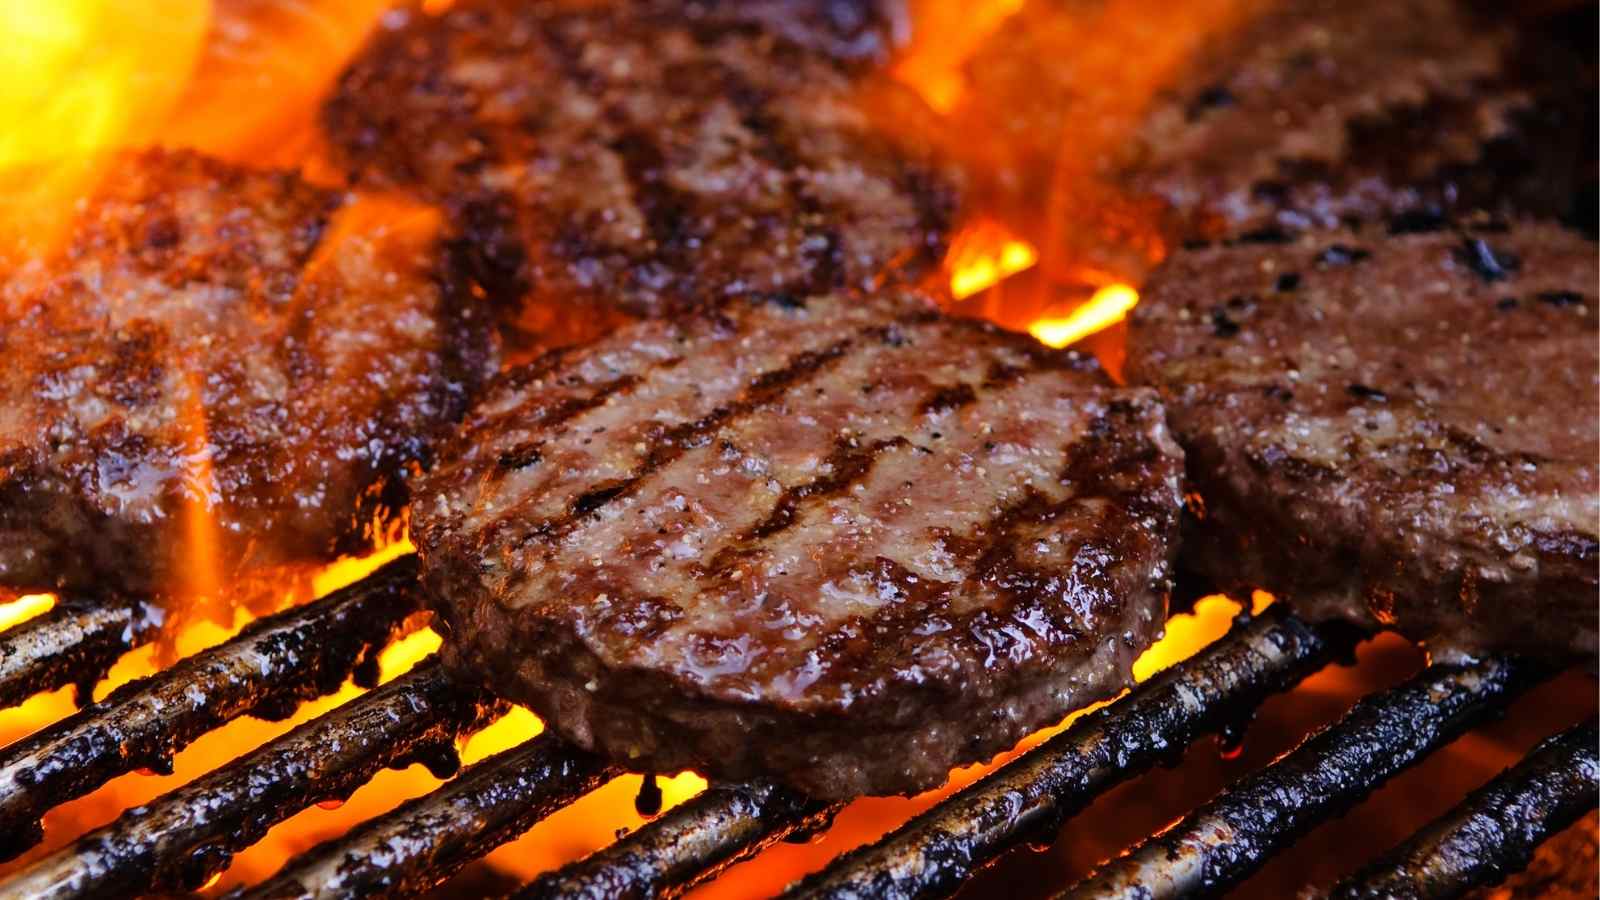 How Long to Grill Burgers (Burger Grill Time) - TipBuzz